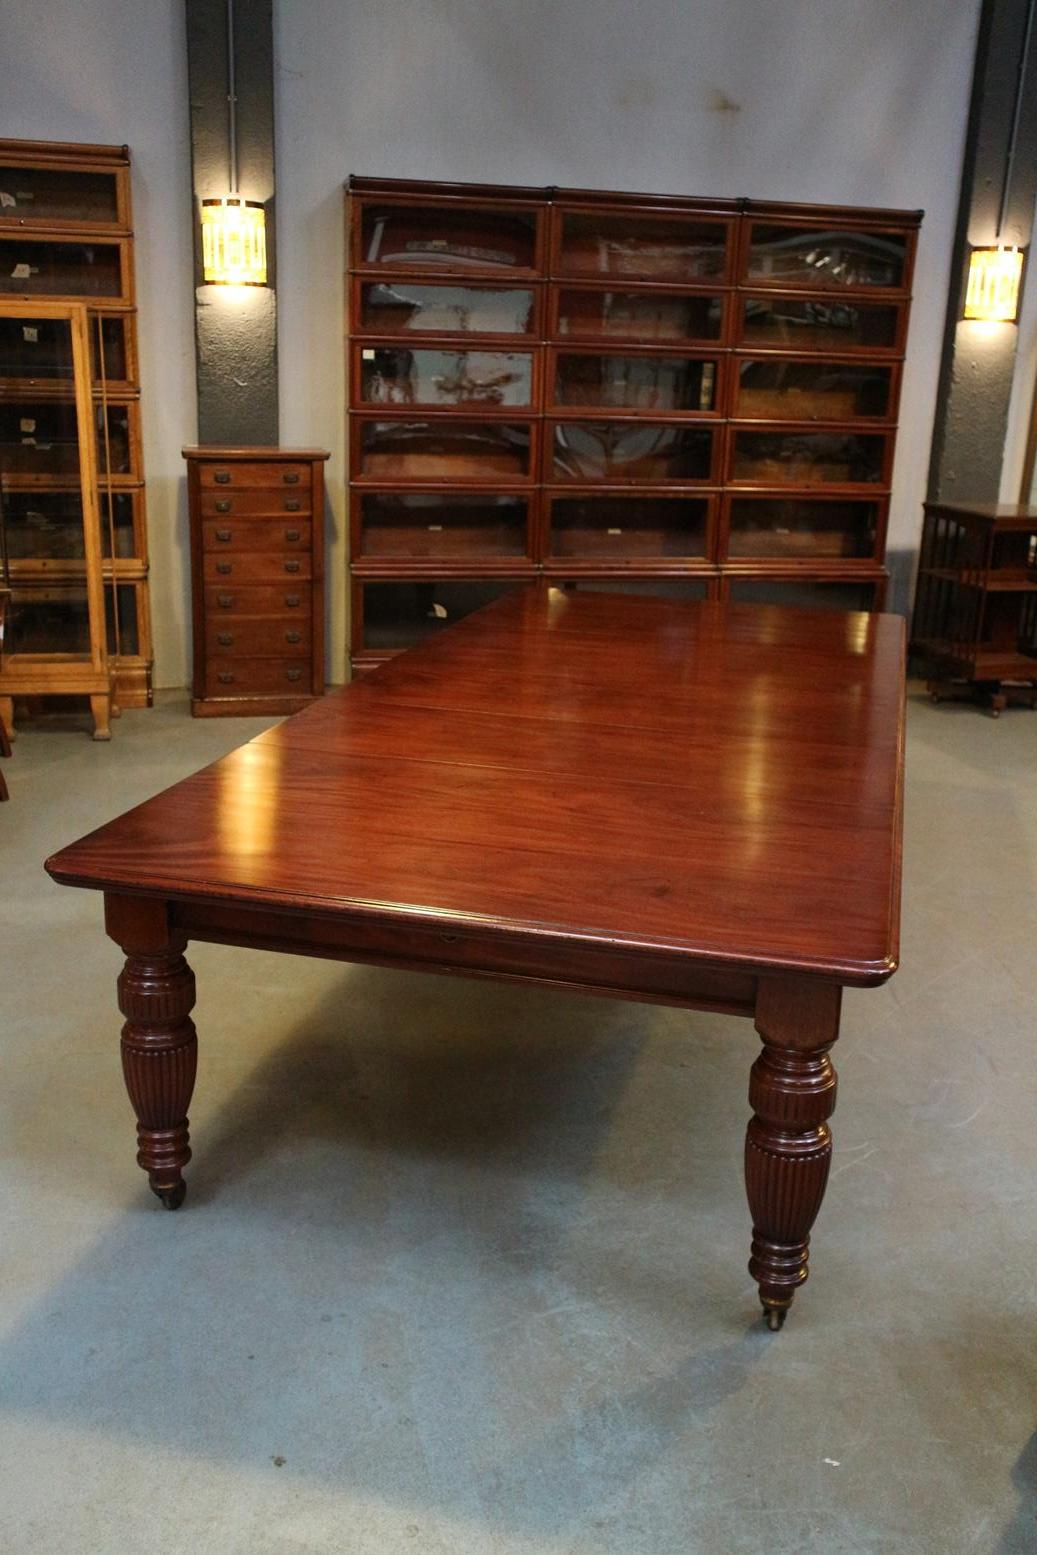 Impressive mahogany English antique mahogany dining room table in very good condition. The table has 3 original extra leaves. Different sizes can be arranged.It is a wind out table using a turning mechanism. The entire system works perfectly. Table